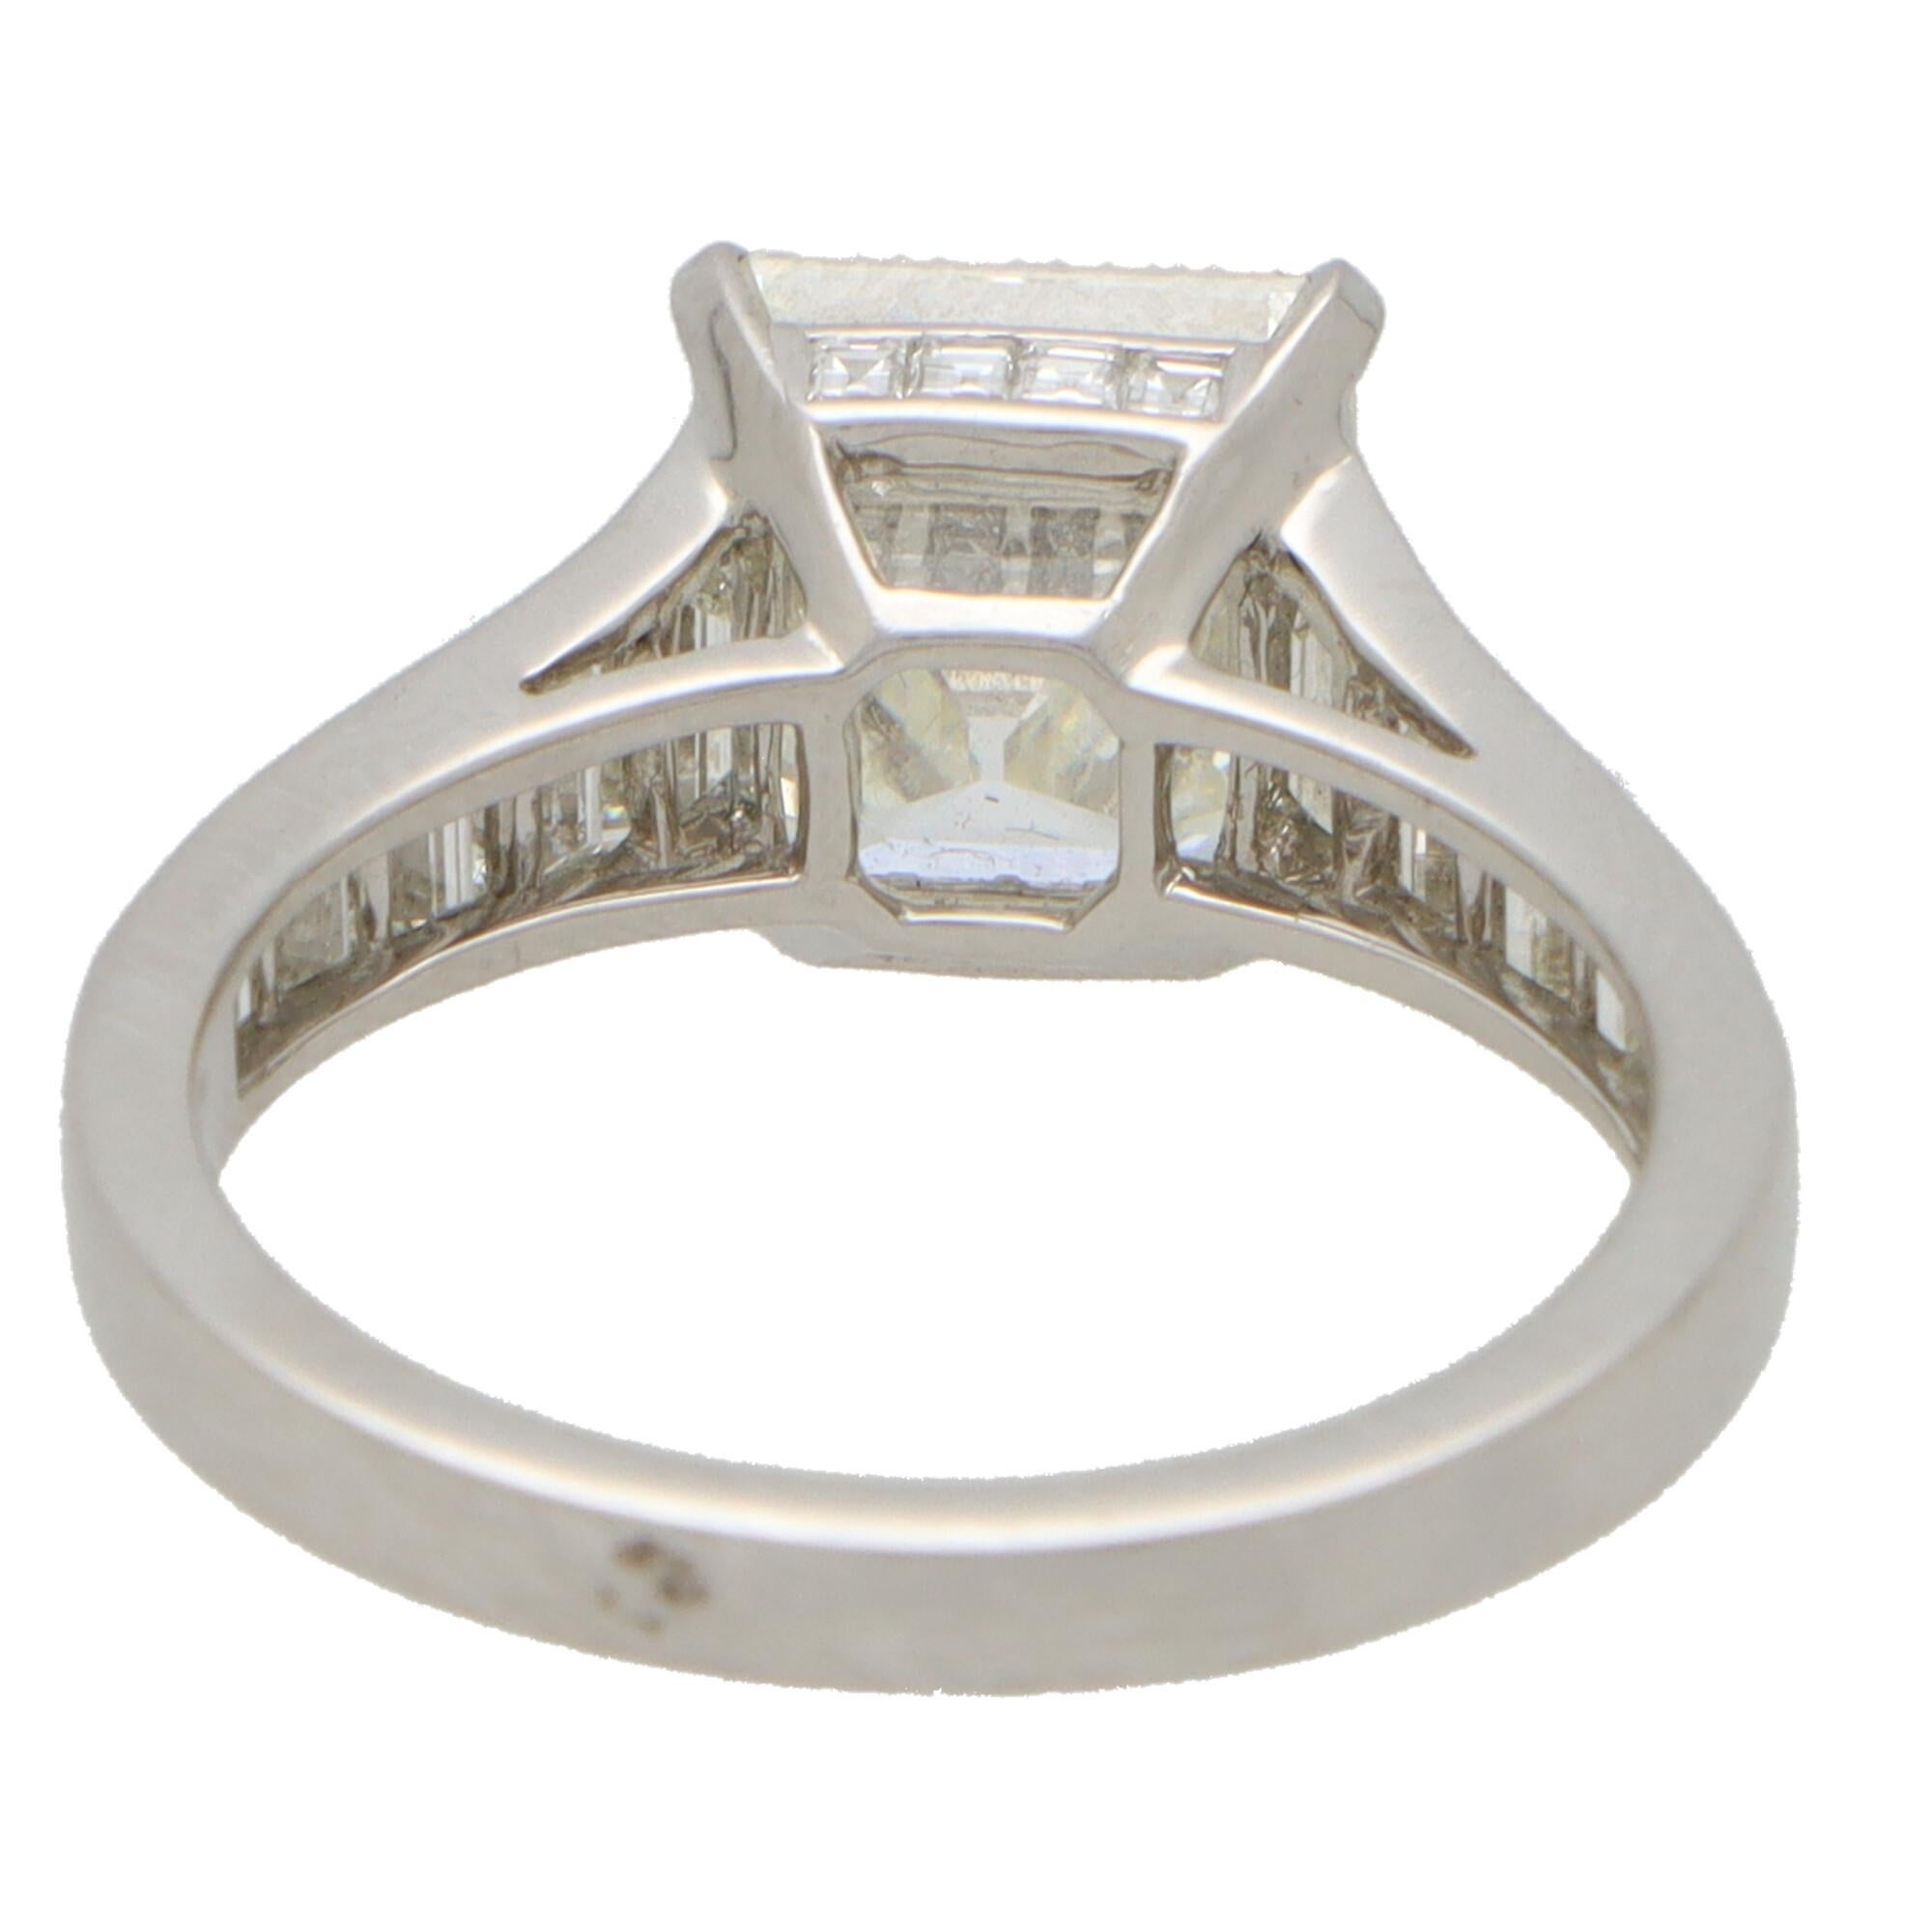 3.02ct Square Emerald Cut Diamond Ring with Baguette Shoulders in Platinum In Excellent Condition For Sale In London, GB